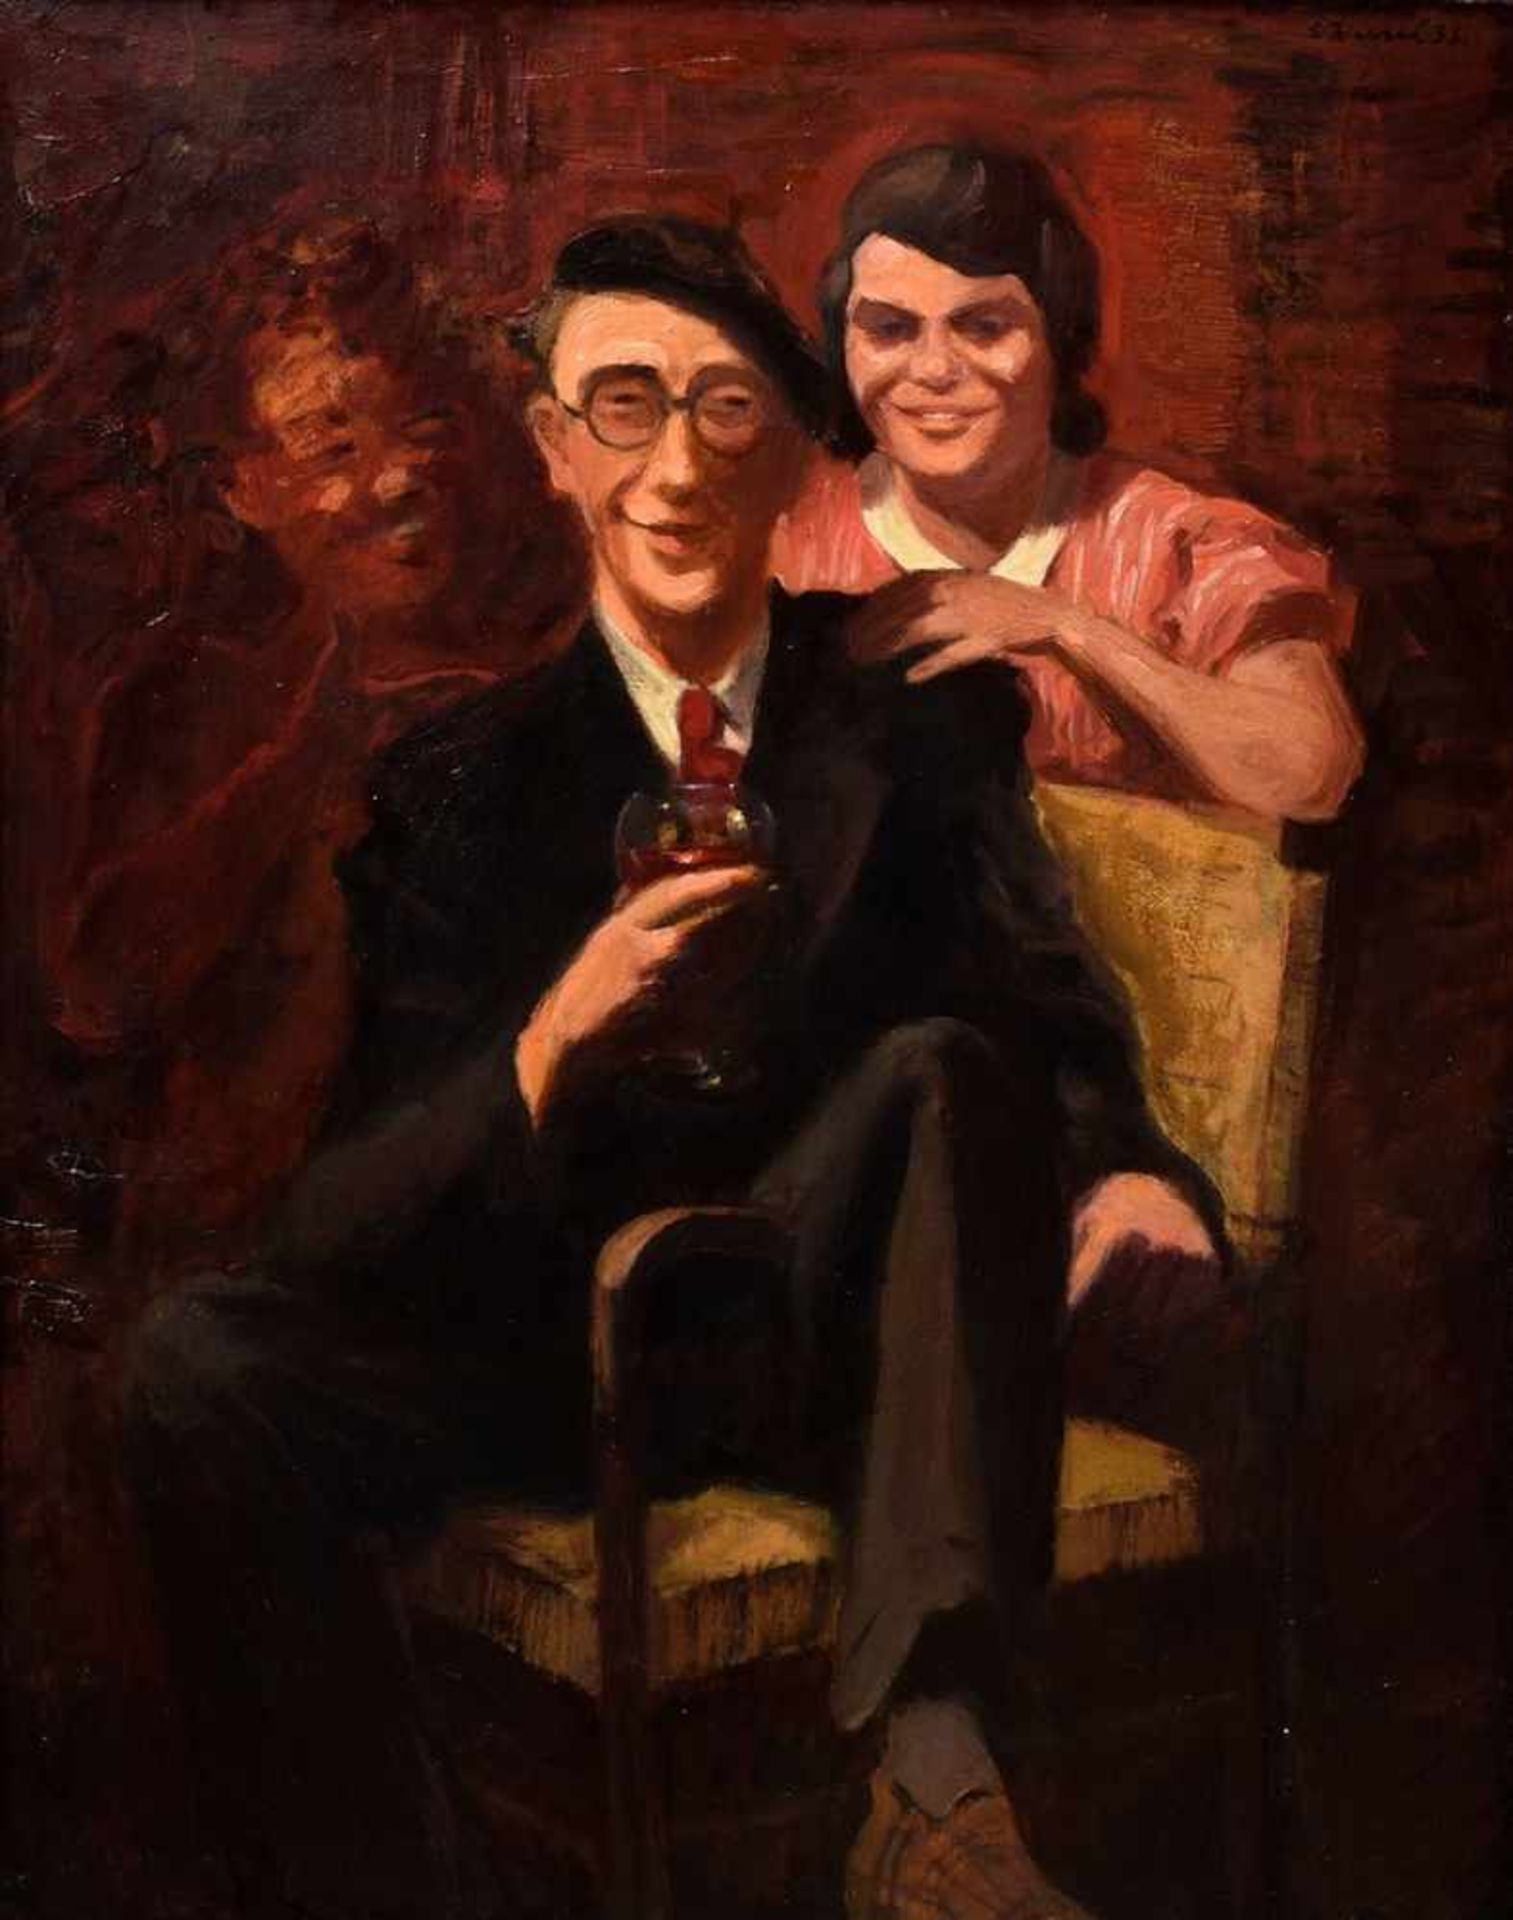 Wessel, Erich (1906-1983) "Self-portrait with wife and Bacchus" 1938, oil/canvas, signed upper